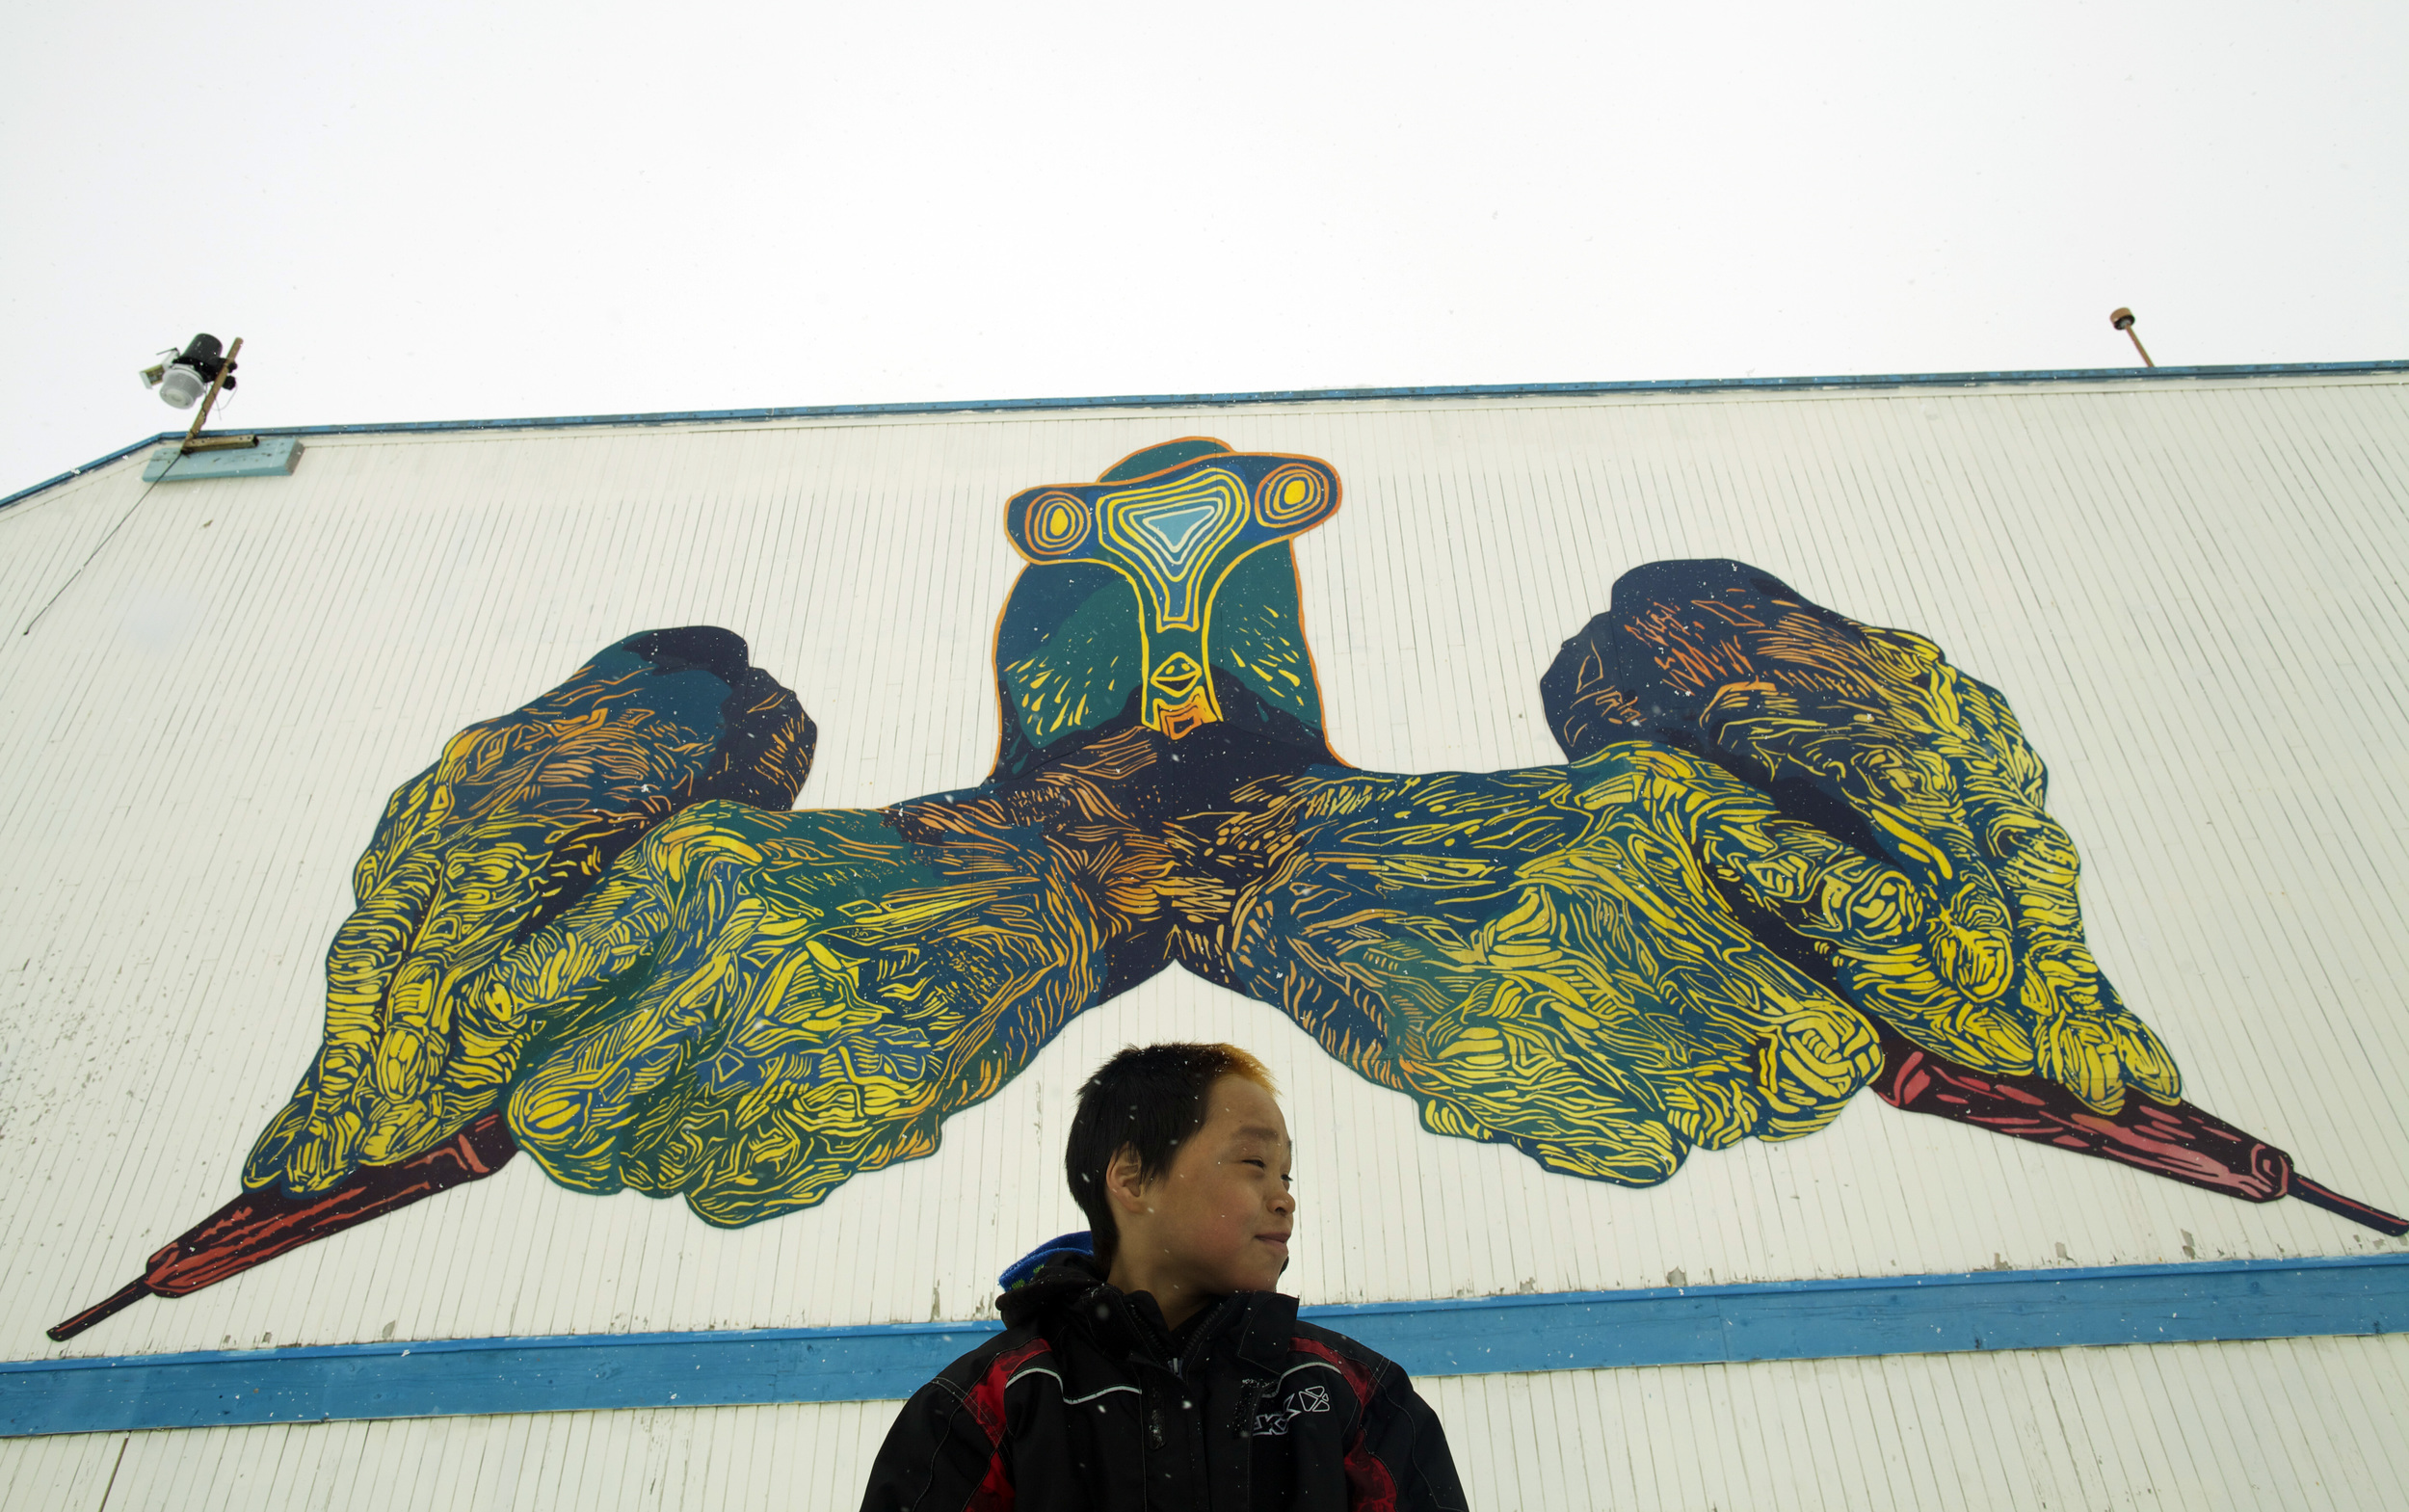   MINE YOUR IMAGINATION, Cape Dorset, Nunavut, Canada,&nbsp;2014-2015   18x36', latex on mounted plywood   We created the hans in the mural by making original linocut prints, and projecting and painting them cut-for-cut: our way of giving a nod to th